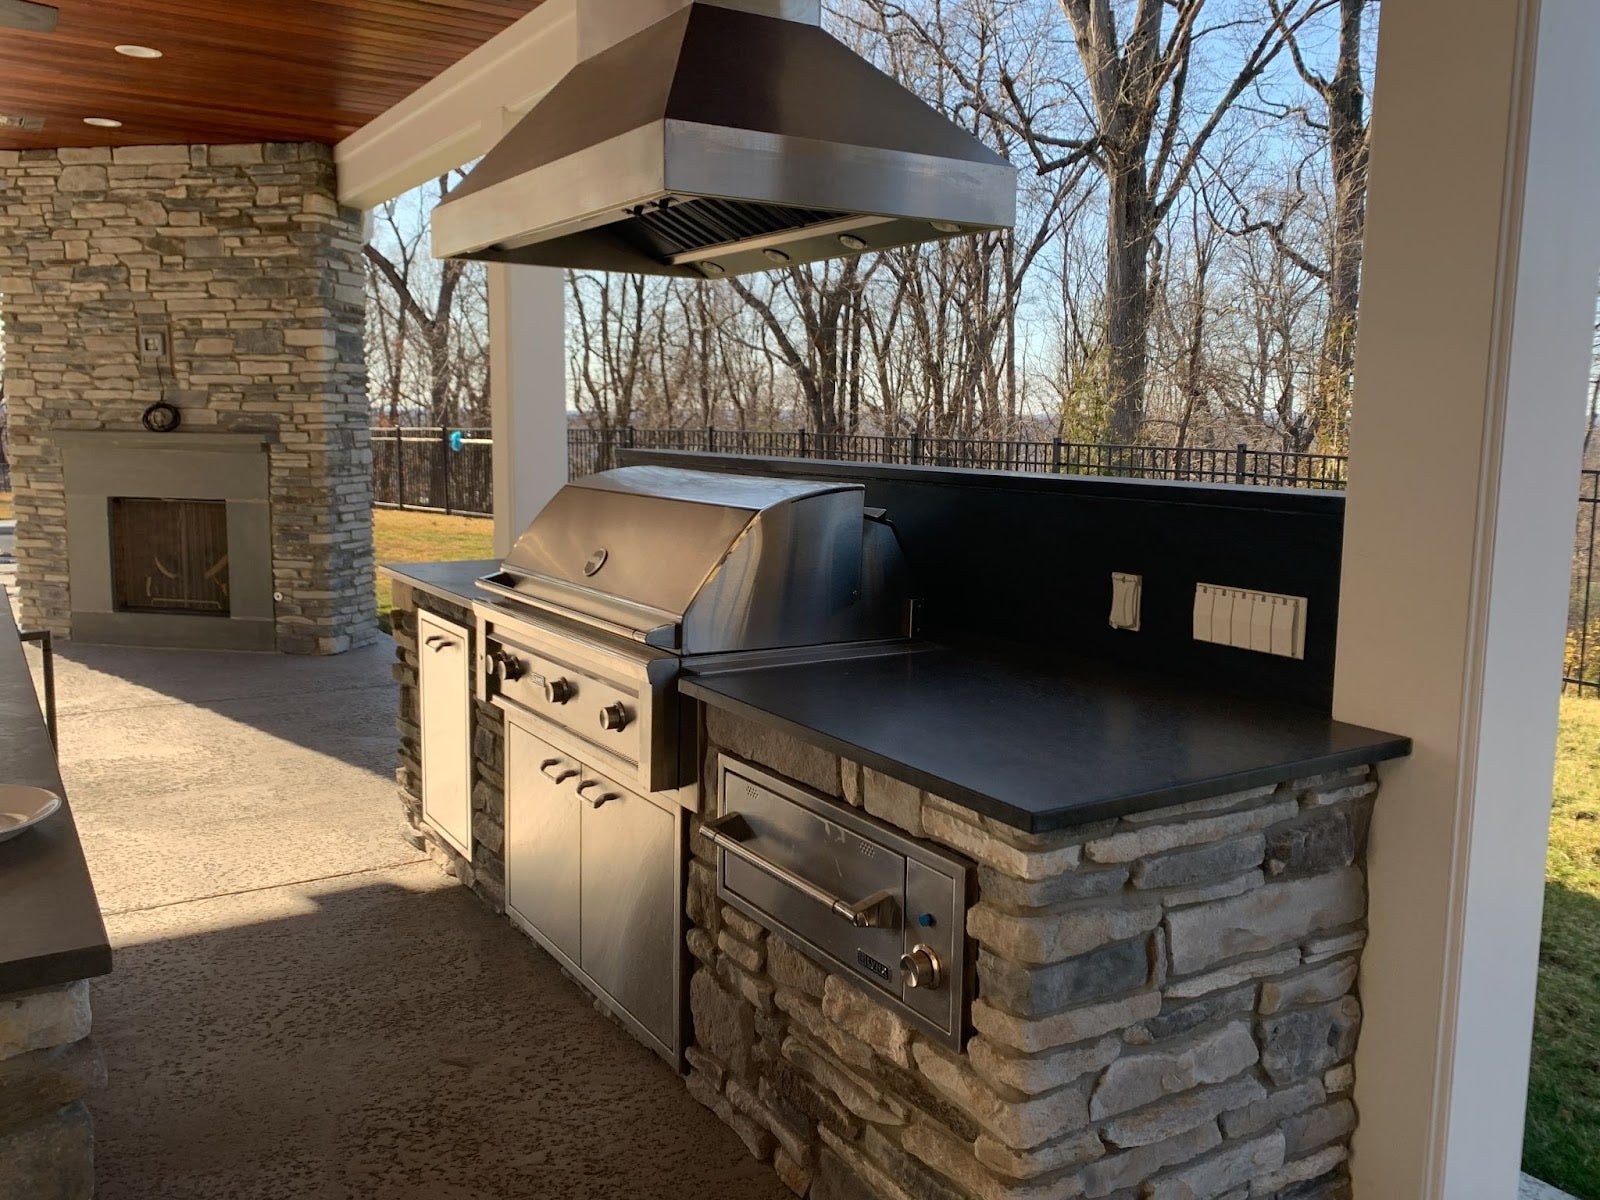 Elegant stone-clad outdoor cooking space with a professional stainless steel grill and matching ventilation system, adjacent to a fireplace. - Proline Range Hoods - prolinerangehoods.com 